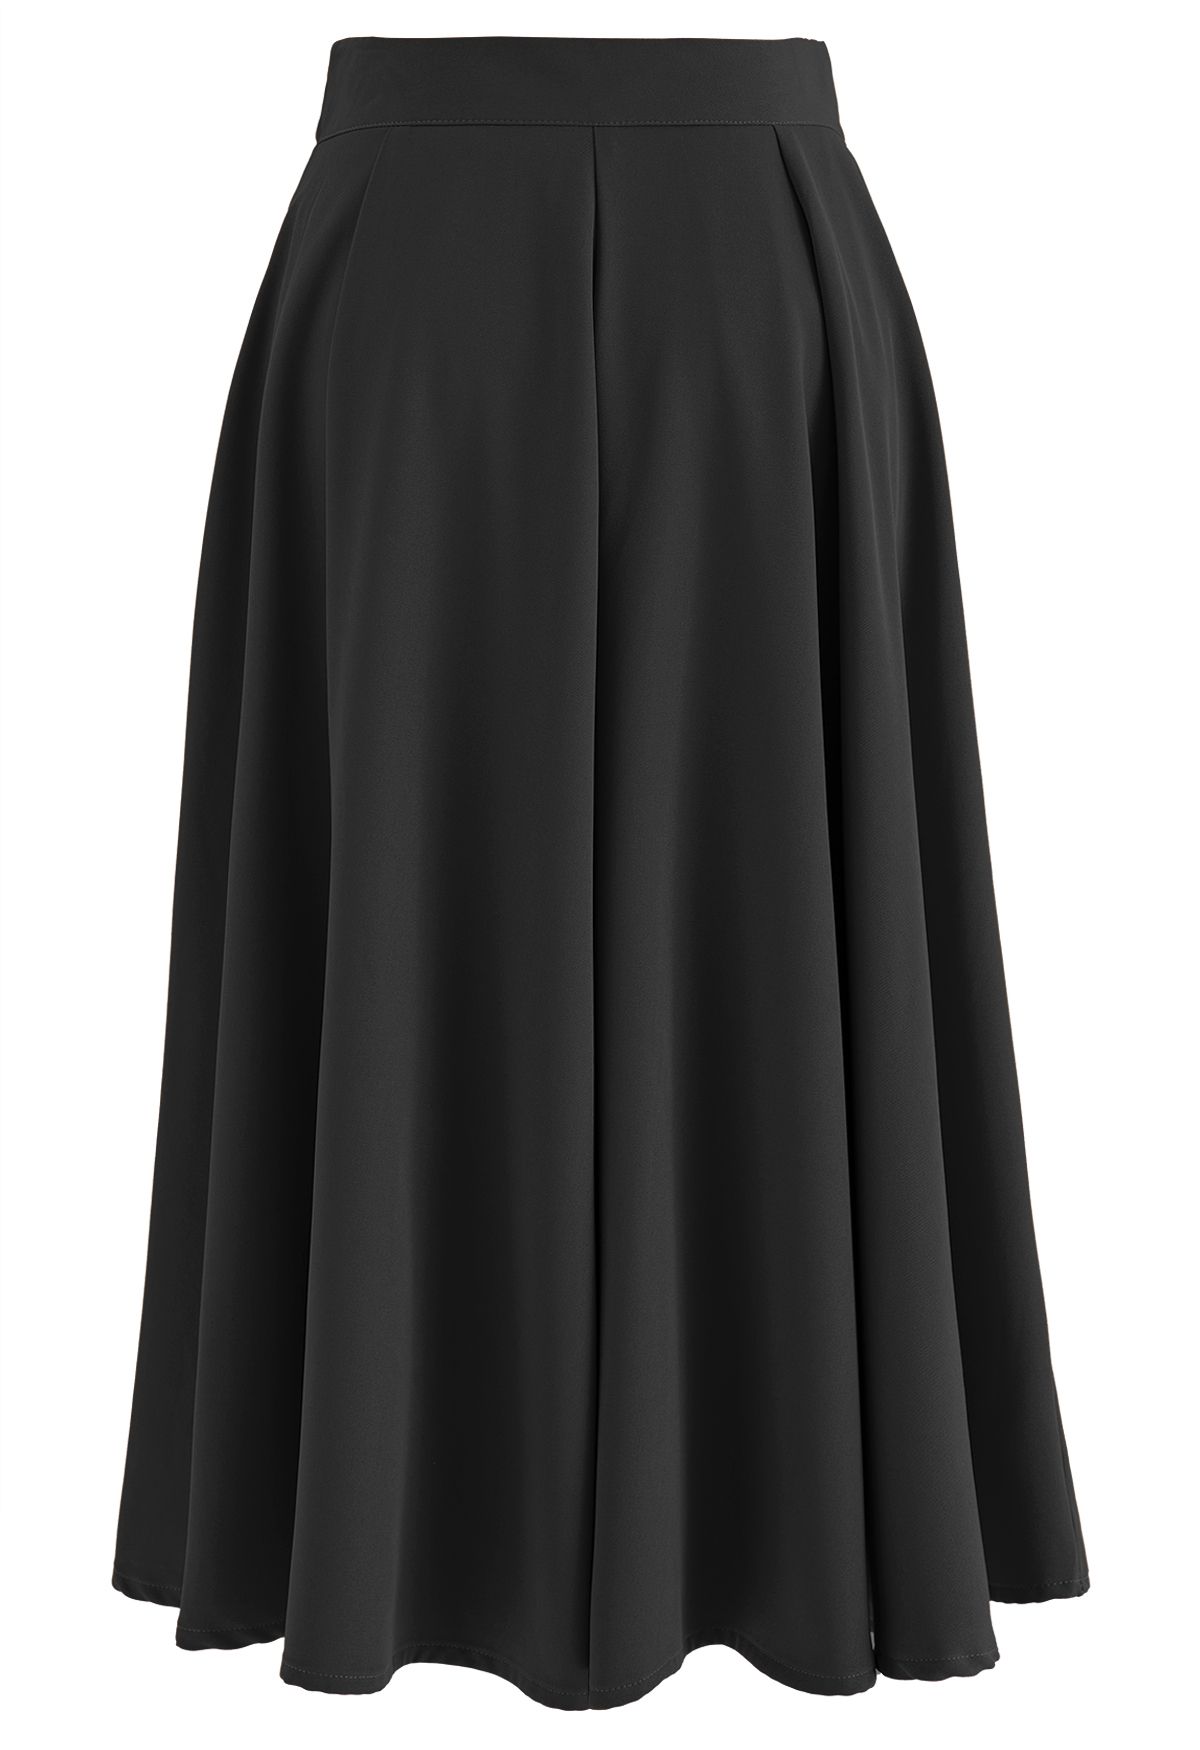 Buttoned Pleated A-Line Skirt in Black - Retro, Indie and Unique Fashion